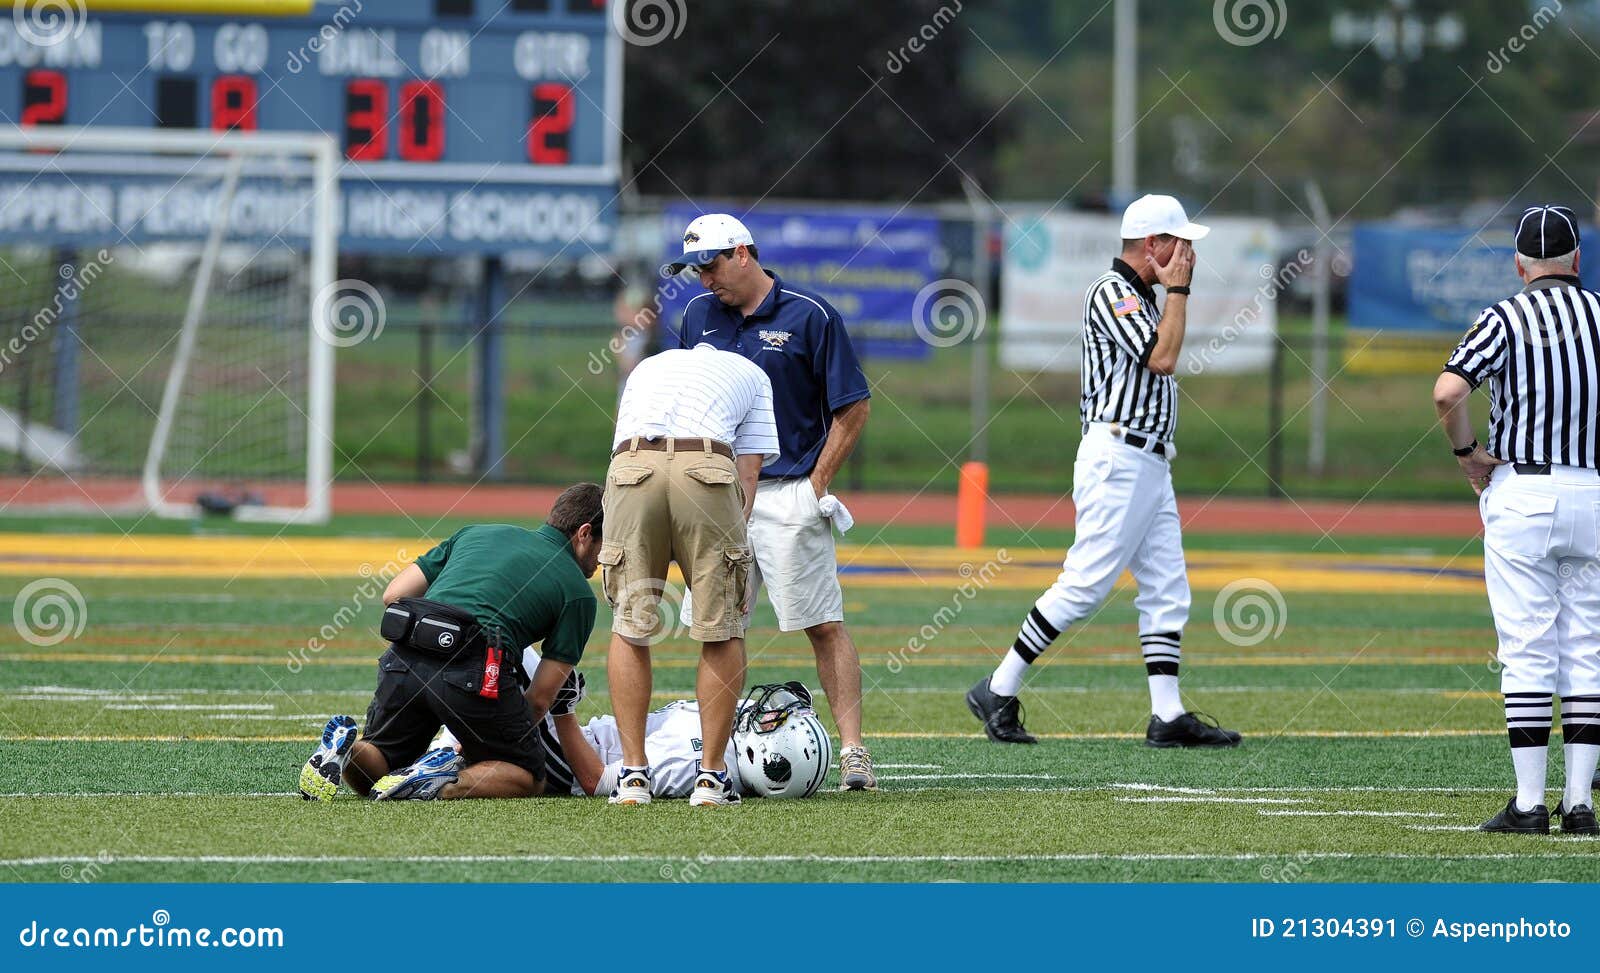 American Football Injury on the Field Editorial Photo - Image of injury